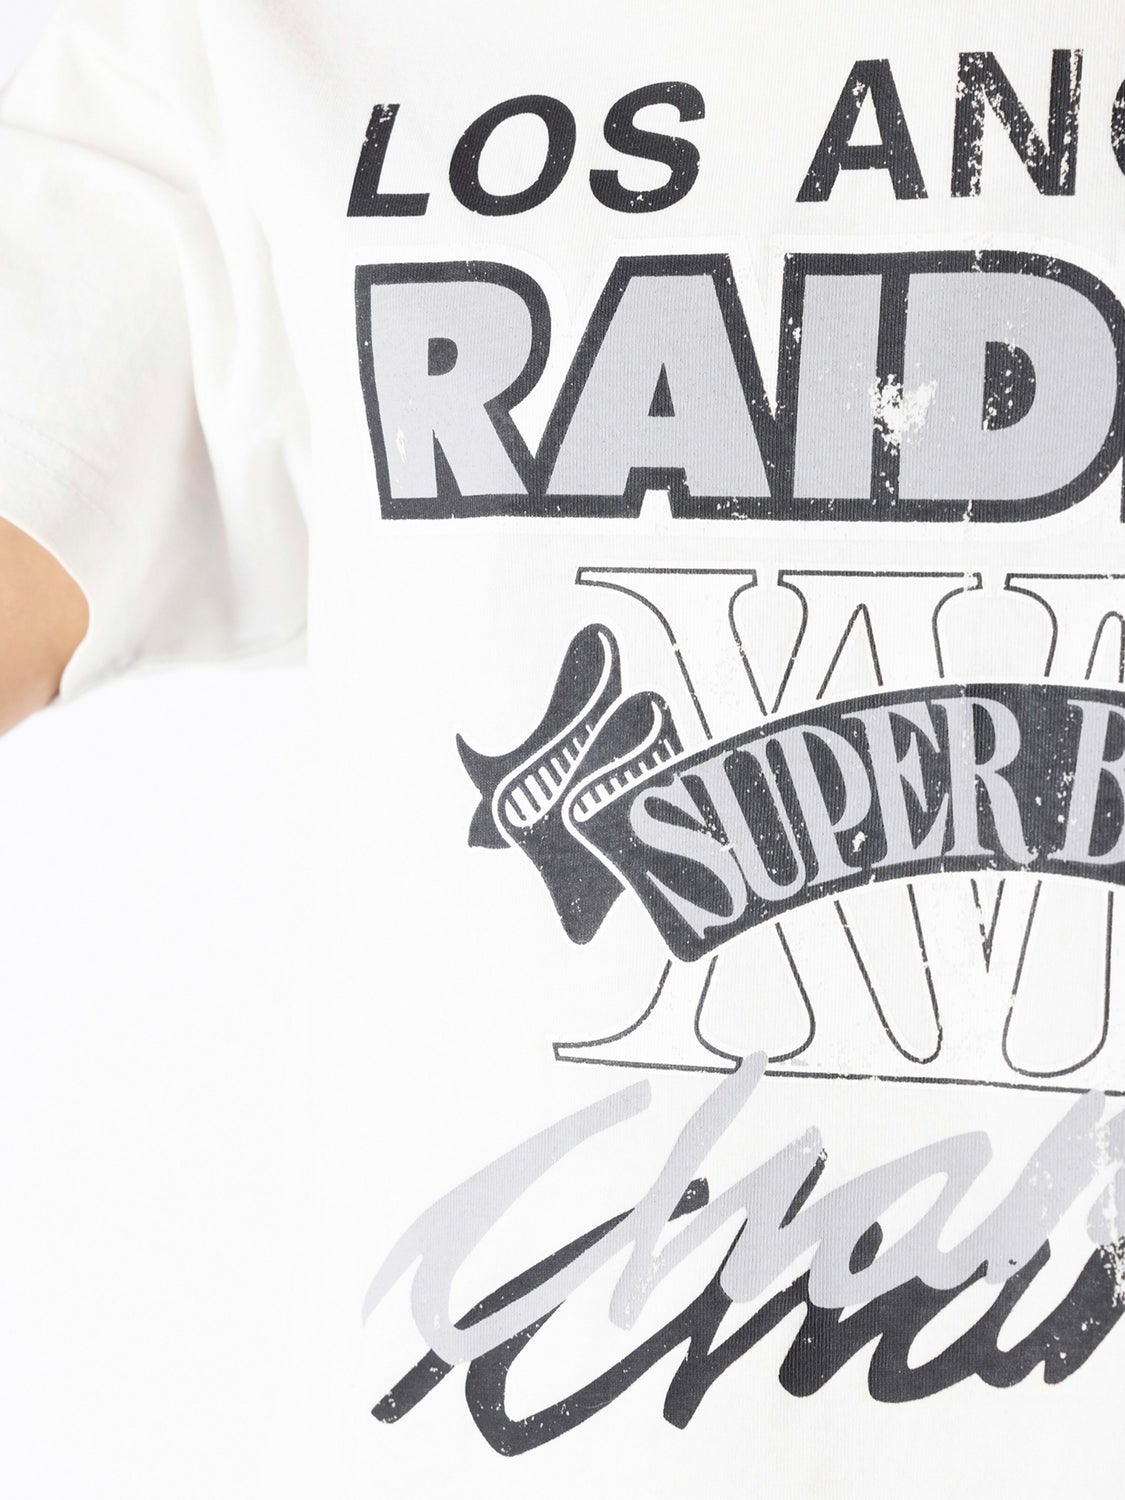 MNA-M16 (Vintage superbowl tee raiders vintage white MNLR0450W) 102193478 MITCHELL AND NESS